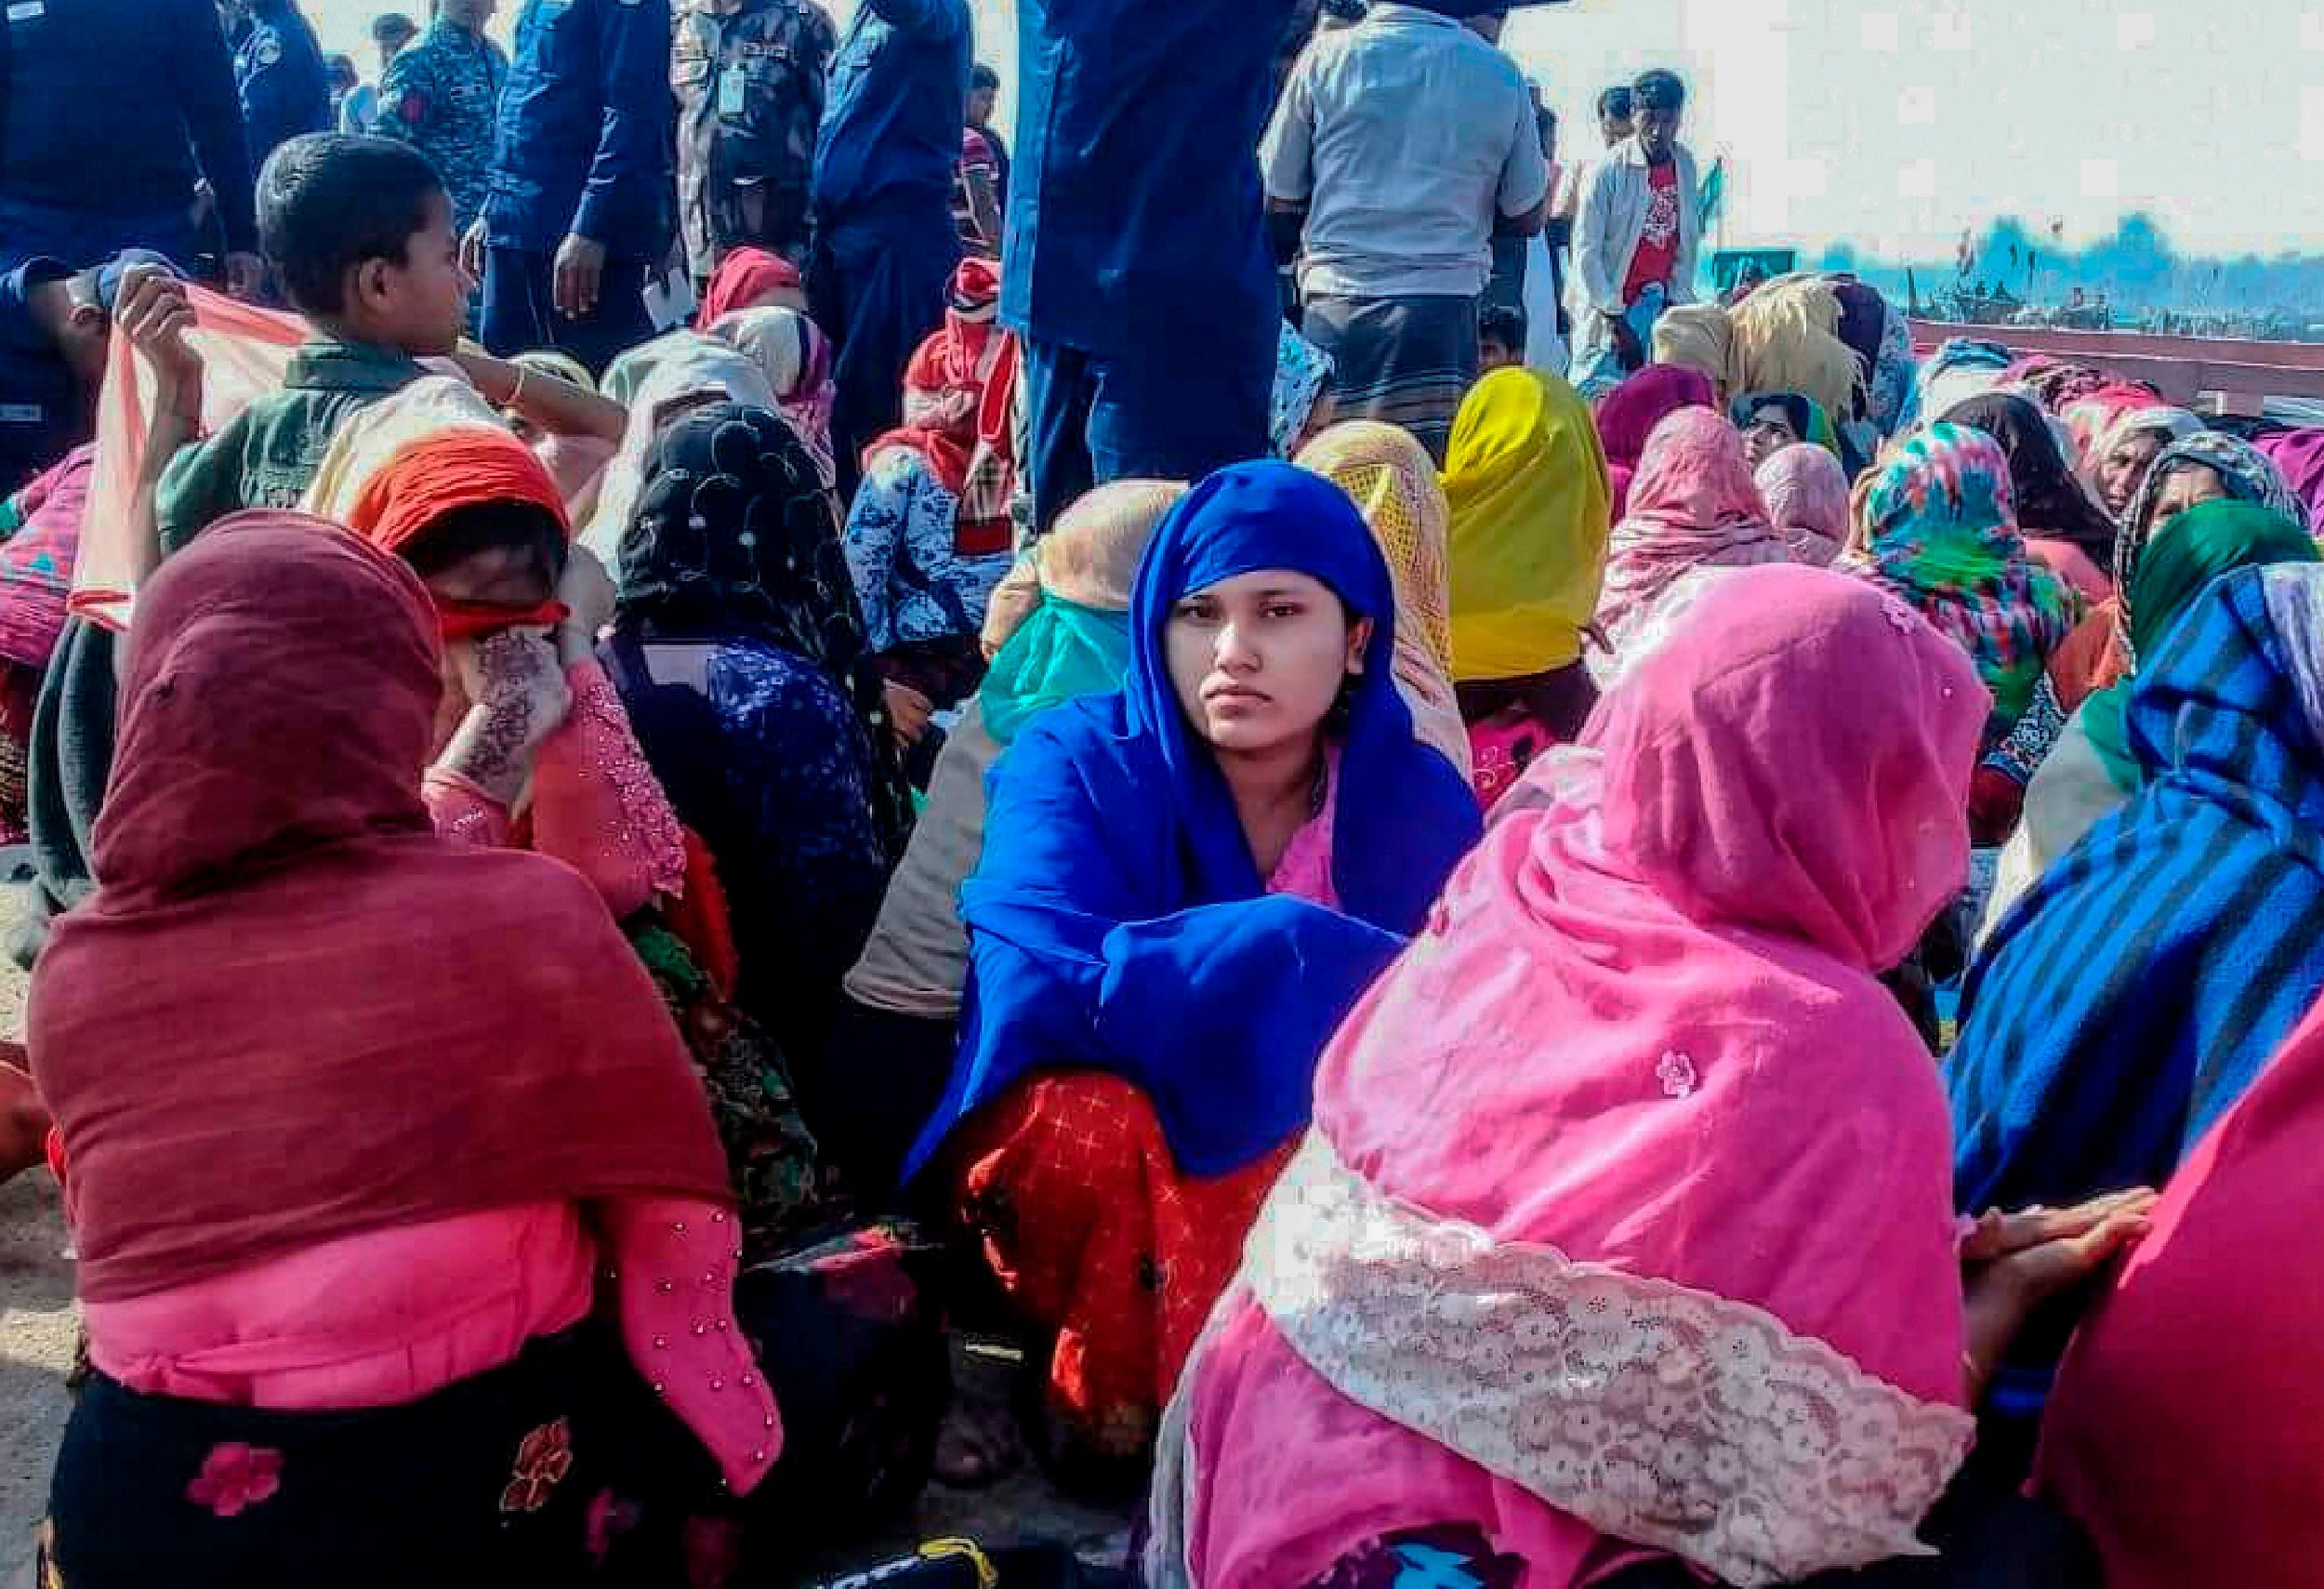 Rohingya refugees wait in an area following a fatal boat capsizing on Tuesday